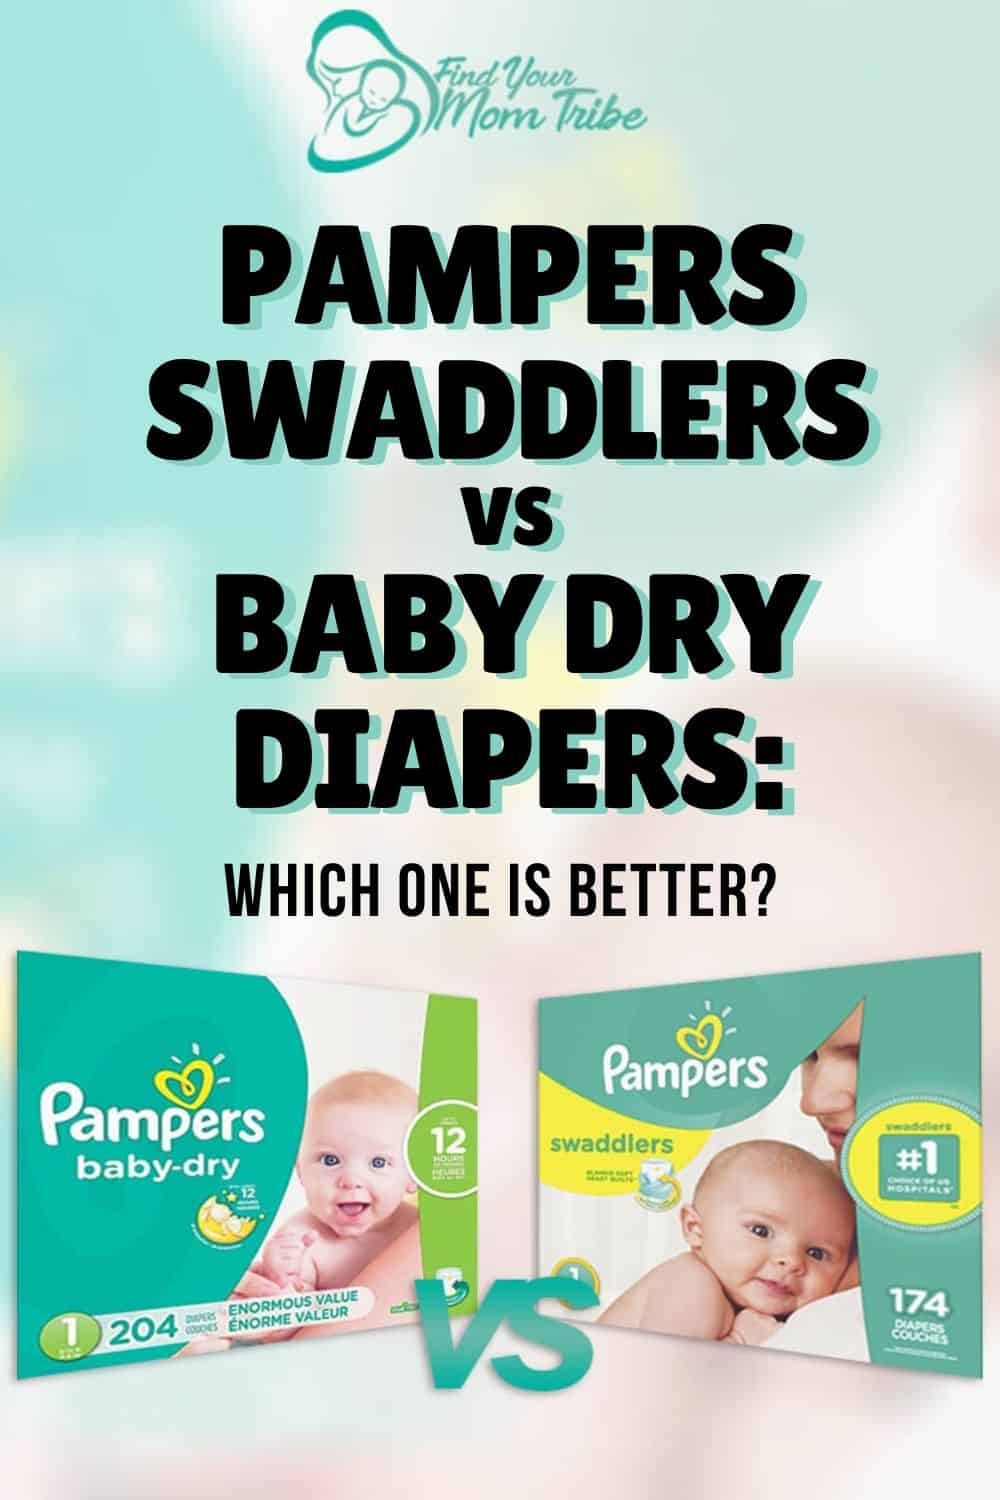 Pampers Swaddlers Vs Baby Dry Diapers: Which One Is Better?